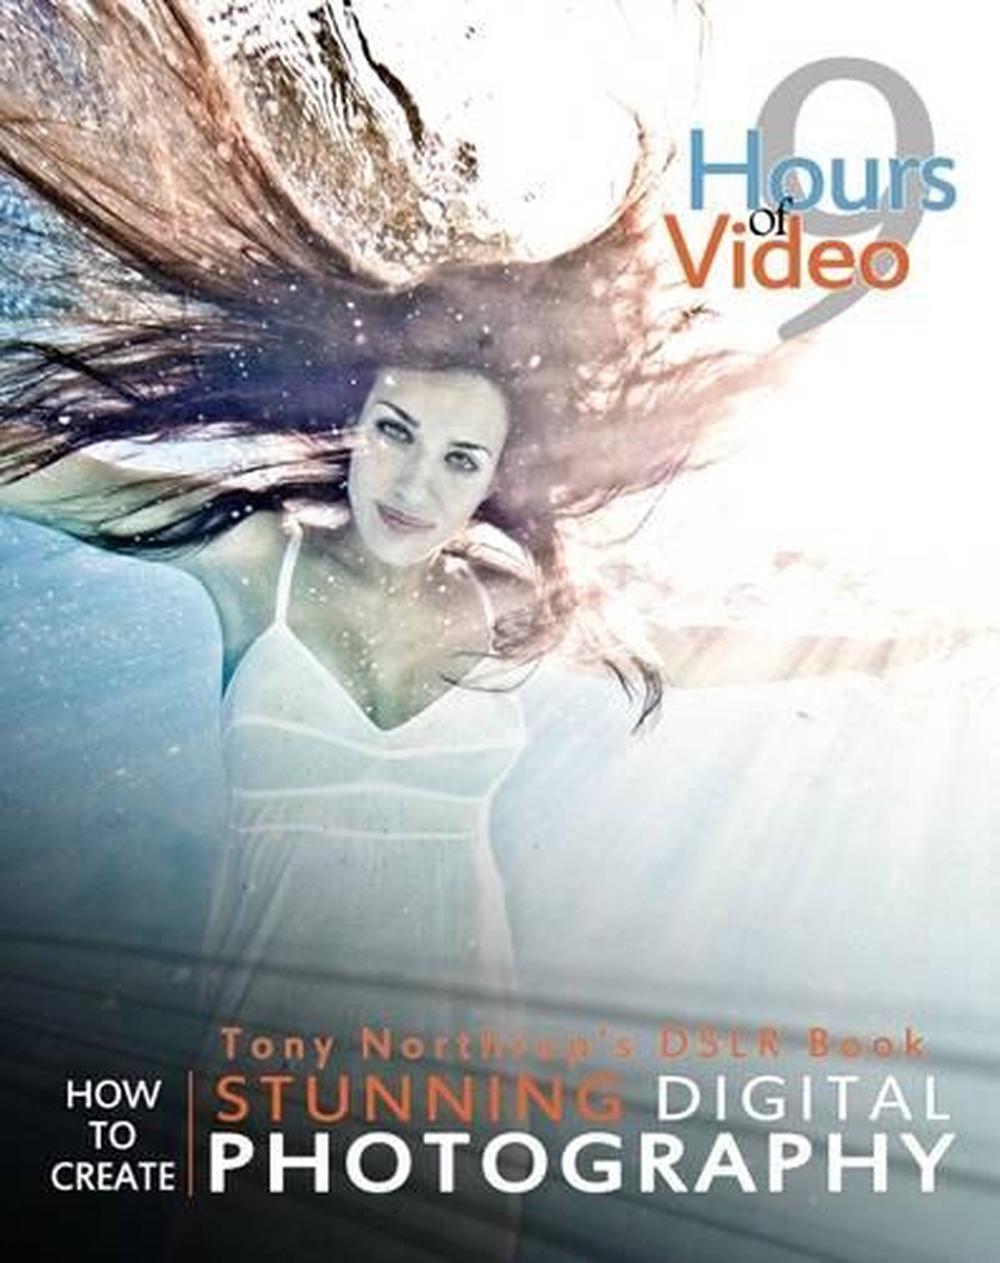 Tony Northrup's Dslr Book How to Create Stunning Digital Photography